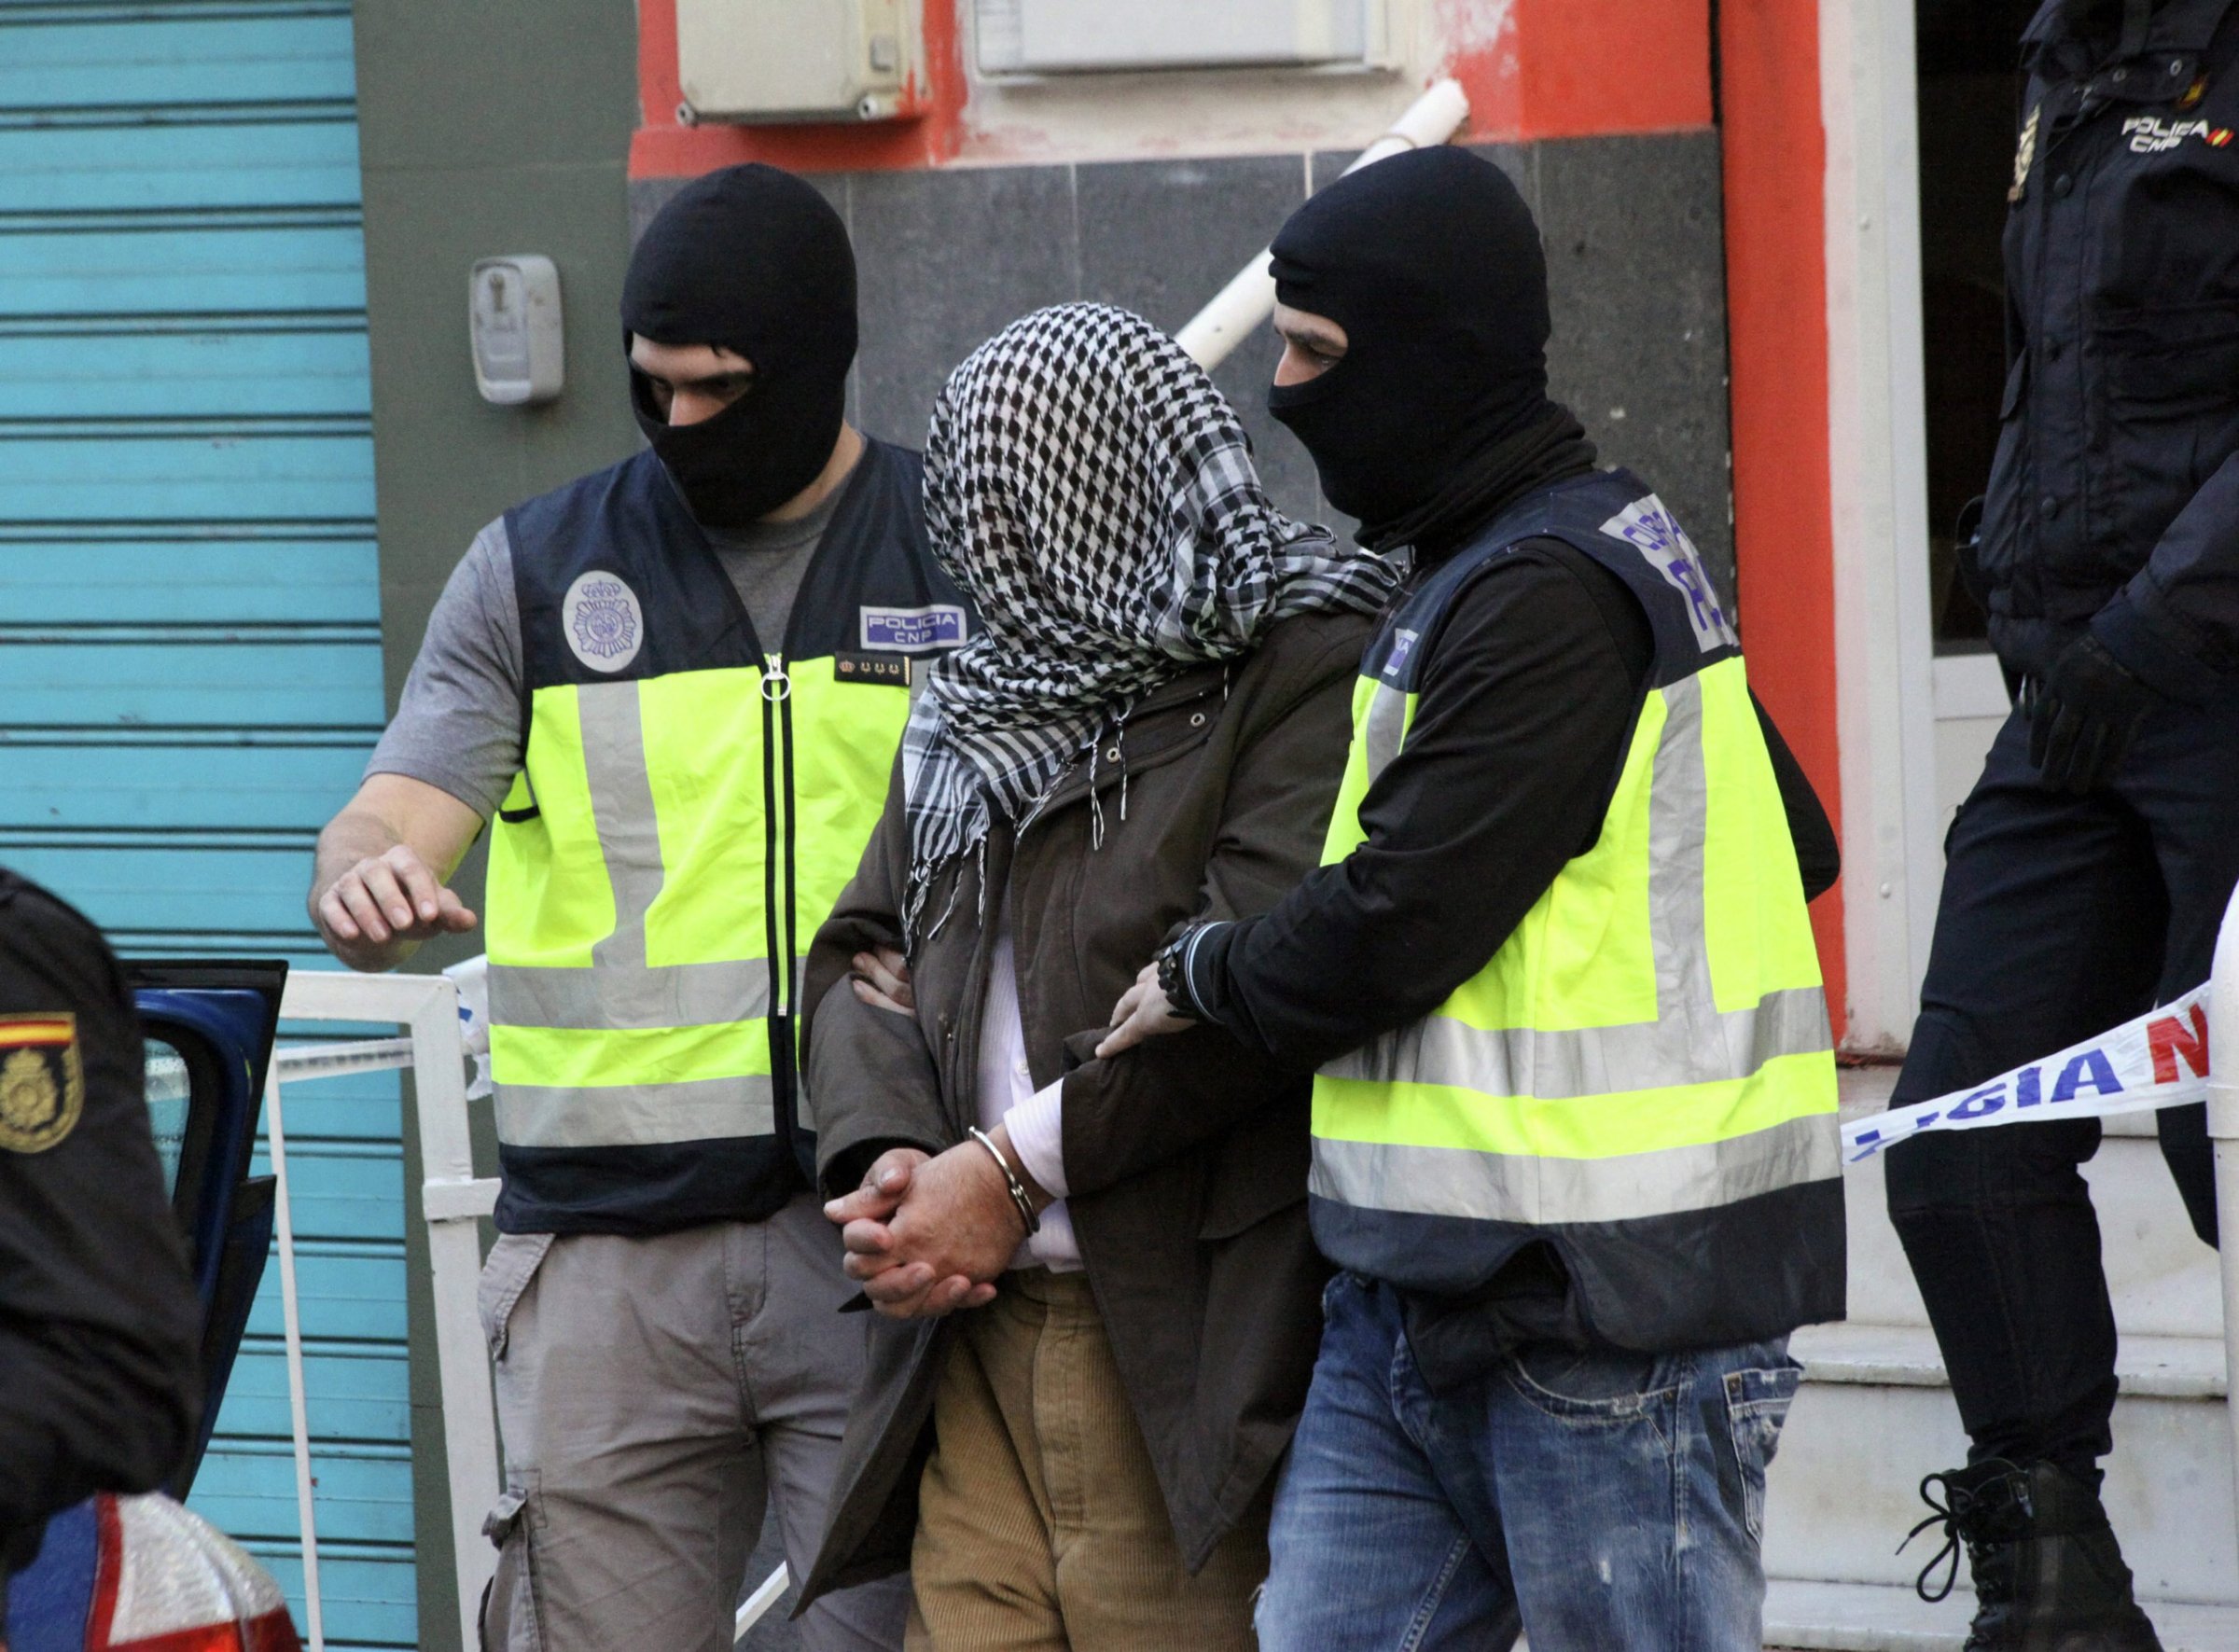 Spanish policemen escort a man who was arrested during a operation against Jihadist terrorism in Ceuta, Spanish enclave in northern Africa, on Feb. 7, 2016.